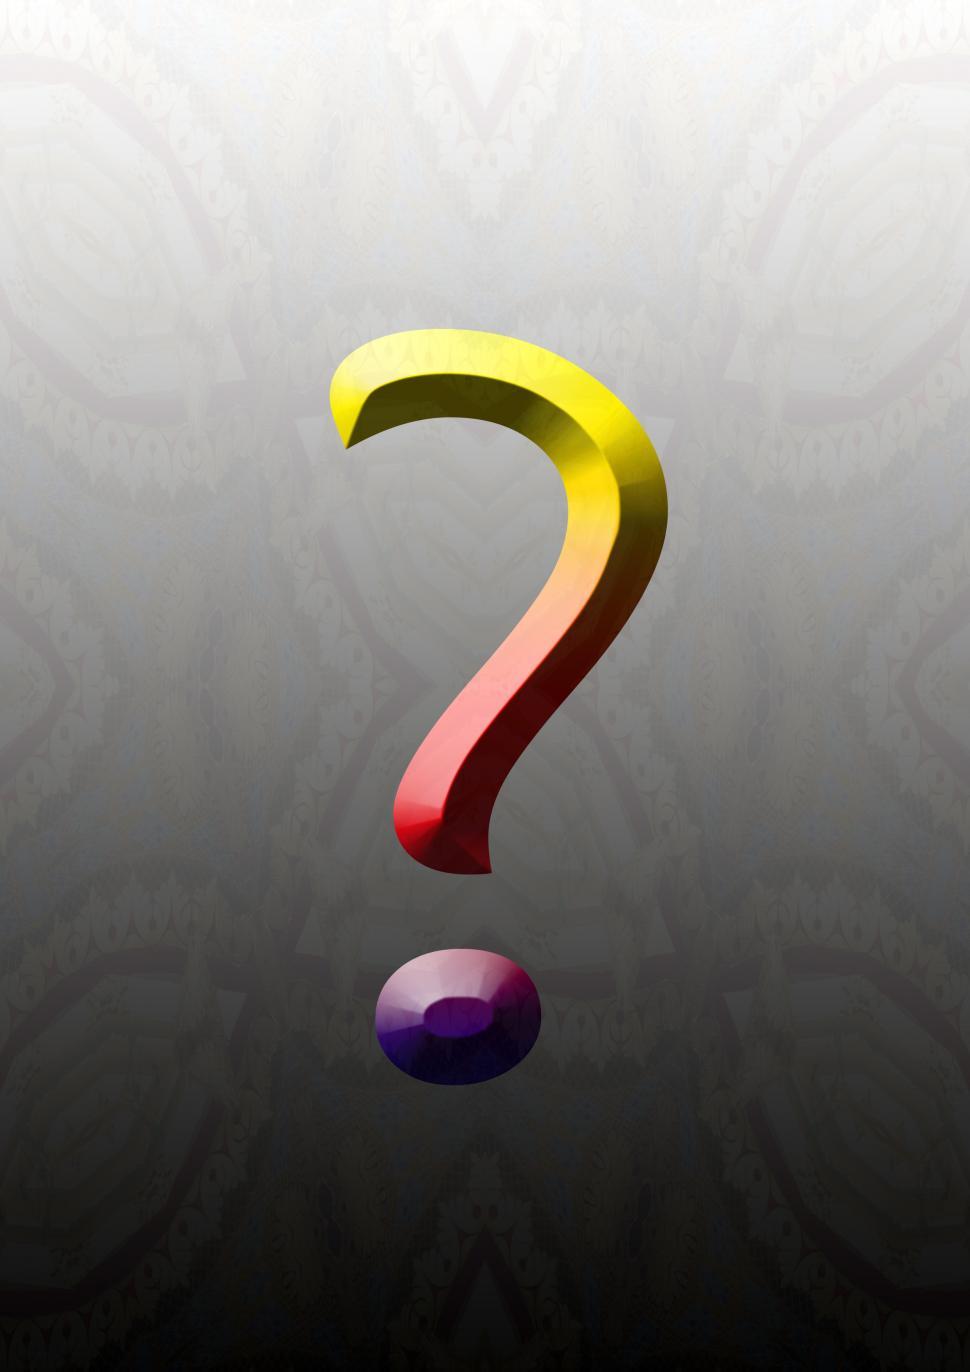 Free Image of Question Mark 